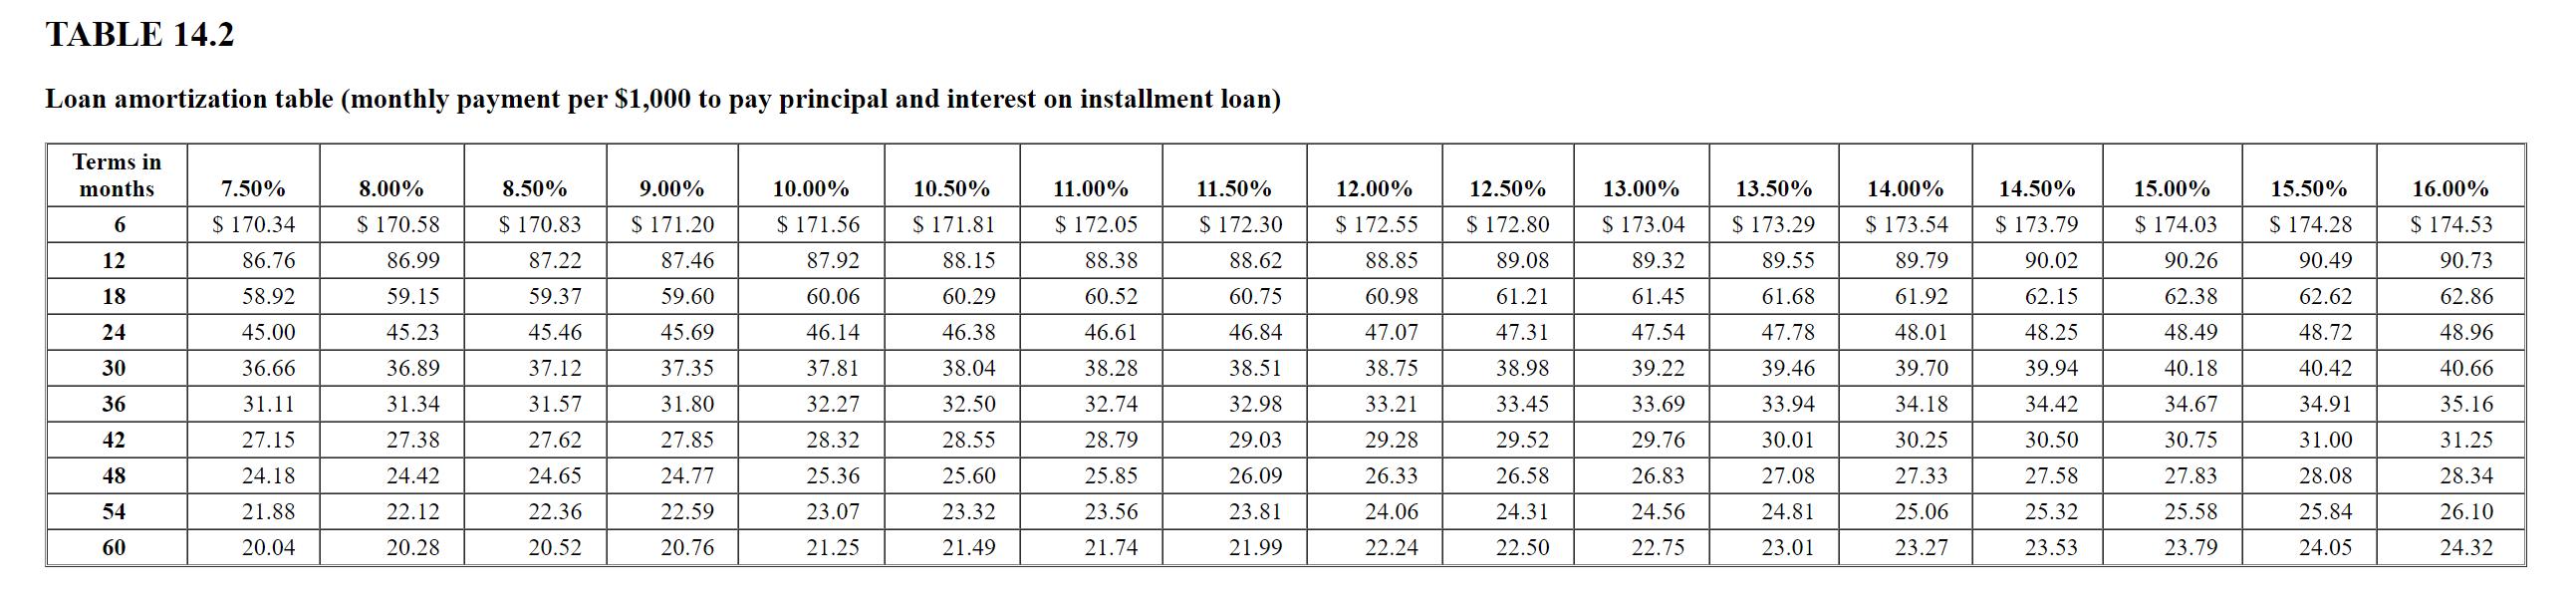 Loan amortization table (monthly payment per ( $ 1,000 ) to pay principal and interest on installment loan)